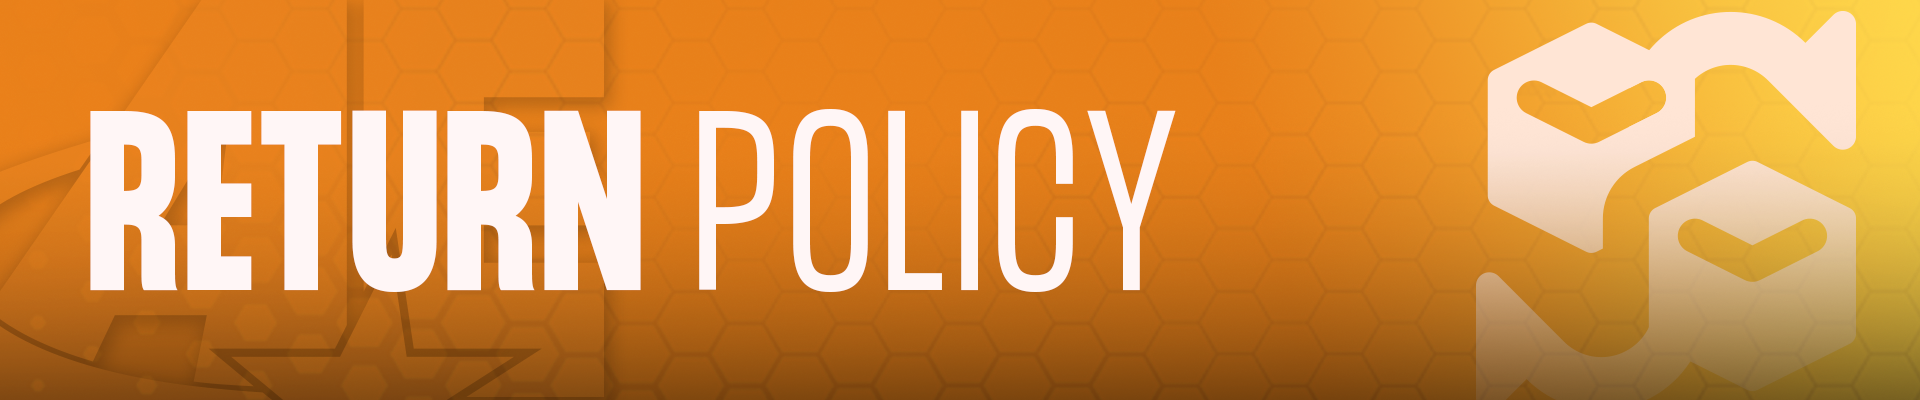 AE Tools & Computers. Return Policy Image Banner with a boxes icon.